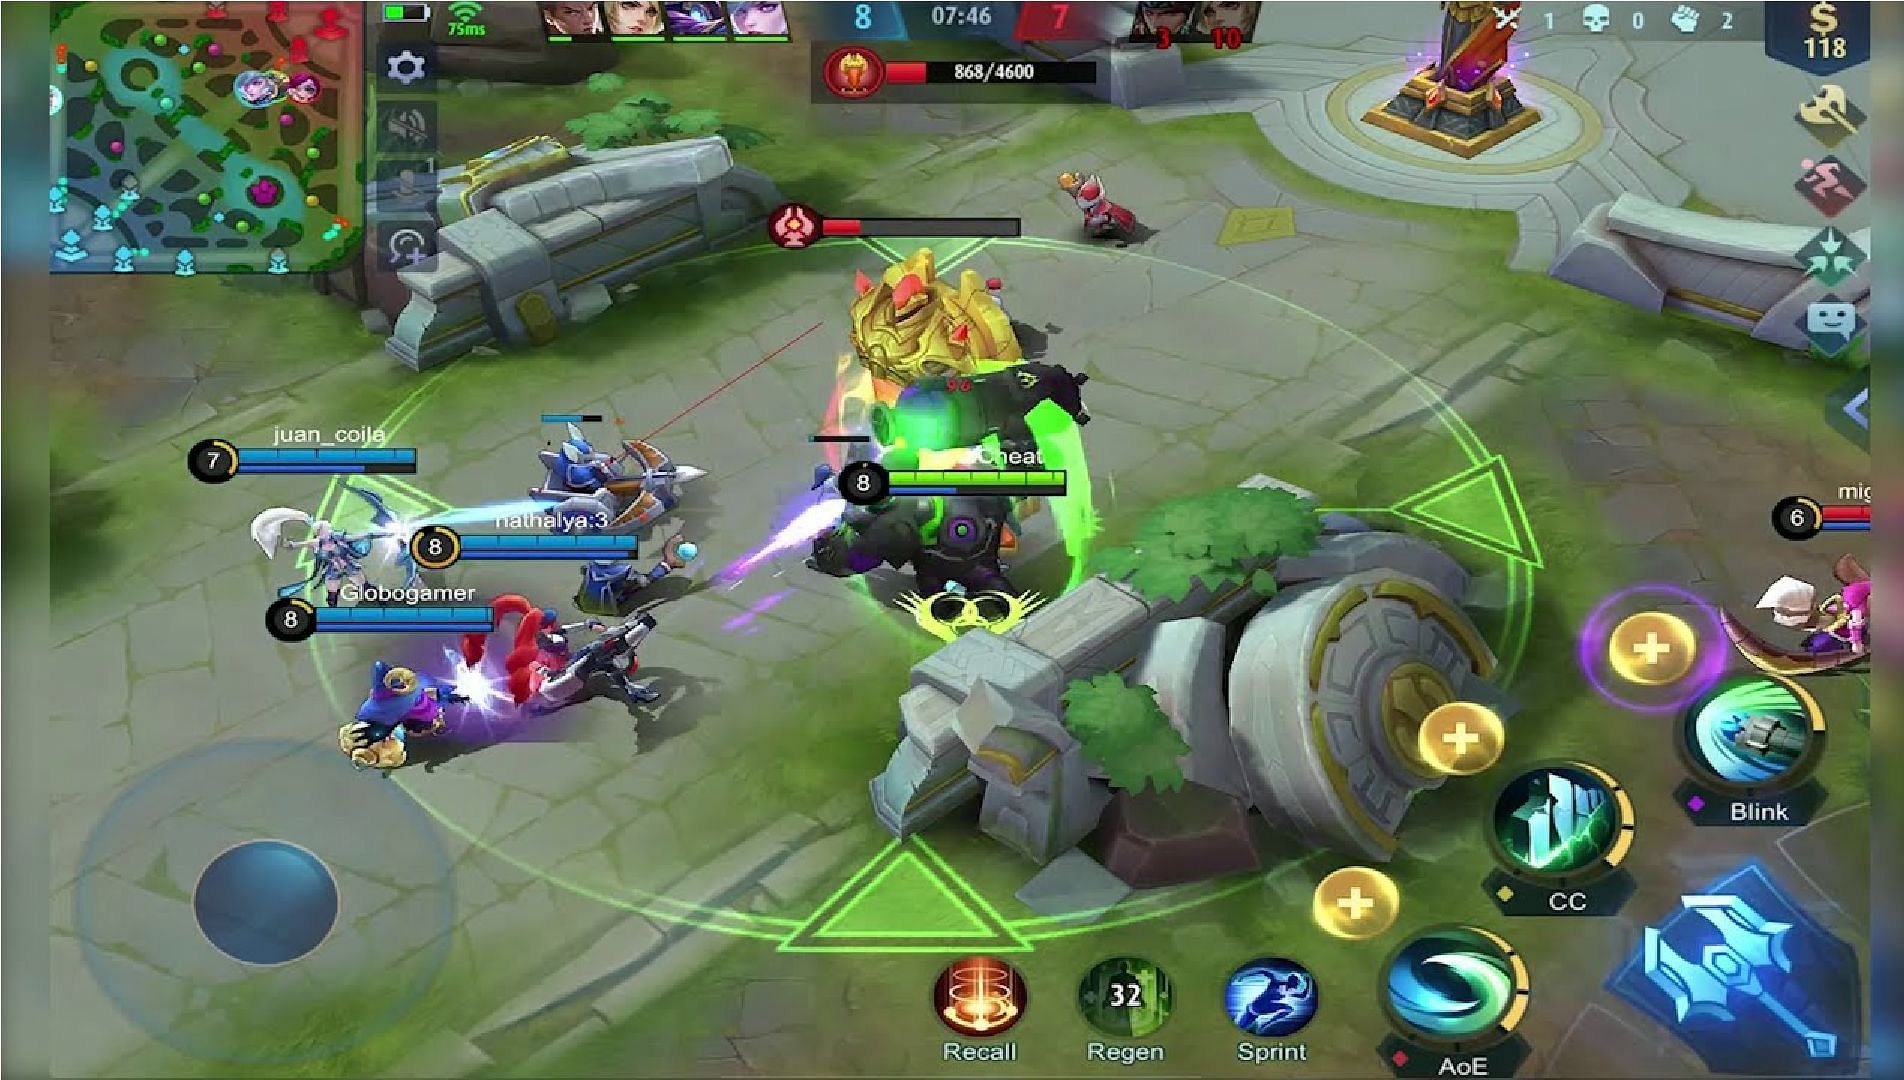 MLBB offers slick gameplay with amazing graphics (Image via YouTube/DroidCheat)